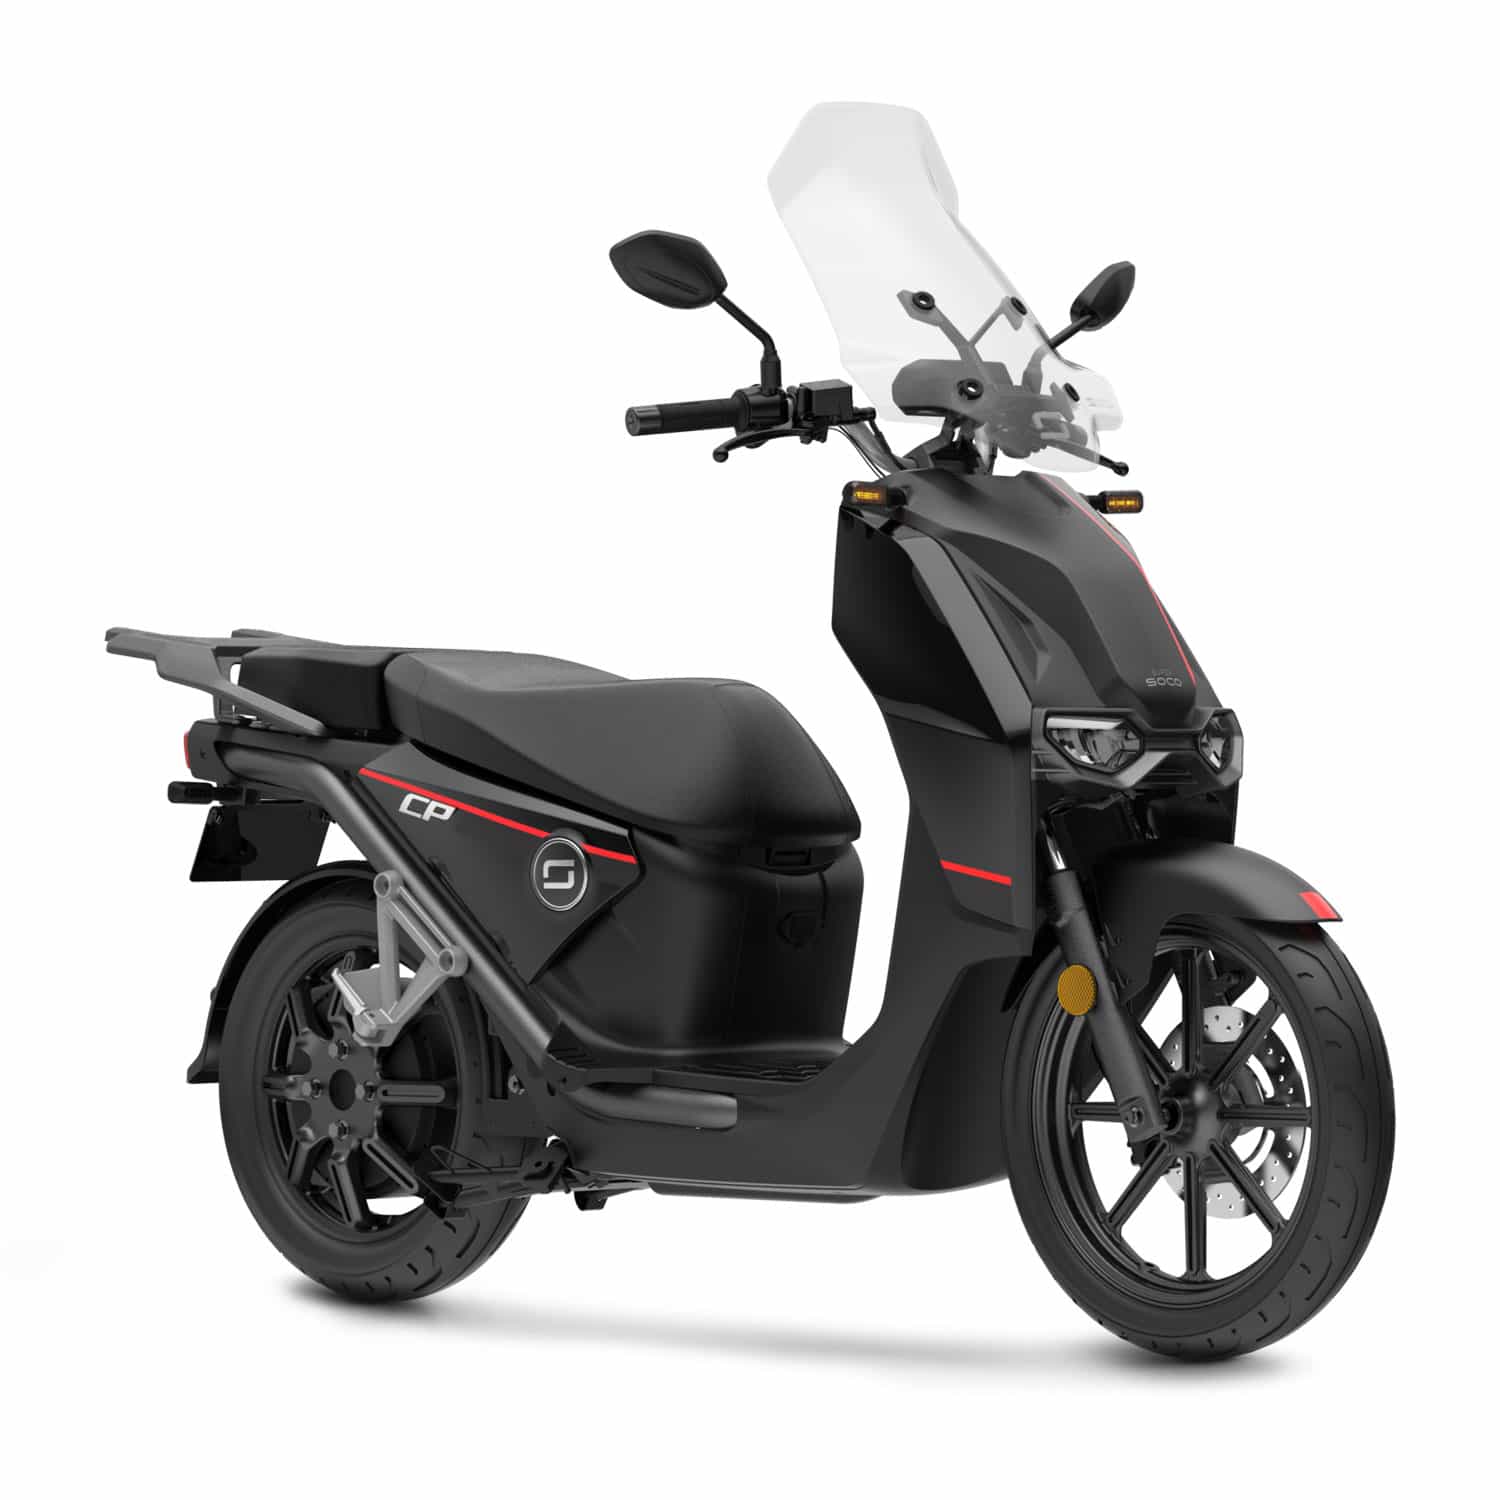 Retroviseur gauche scooter chinois (Noir), Pièces scooter chinois